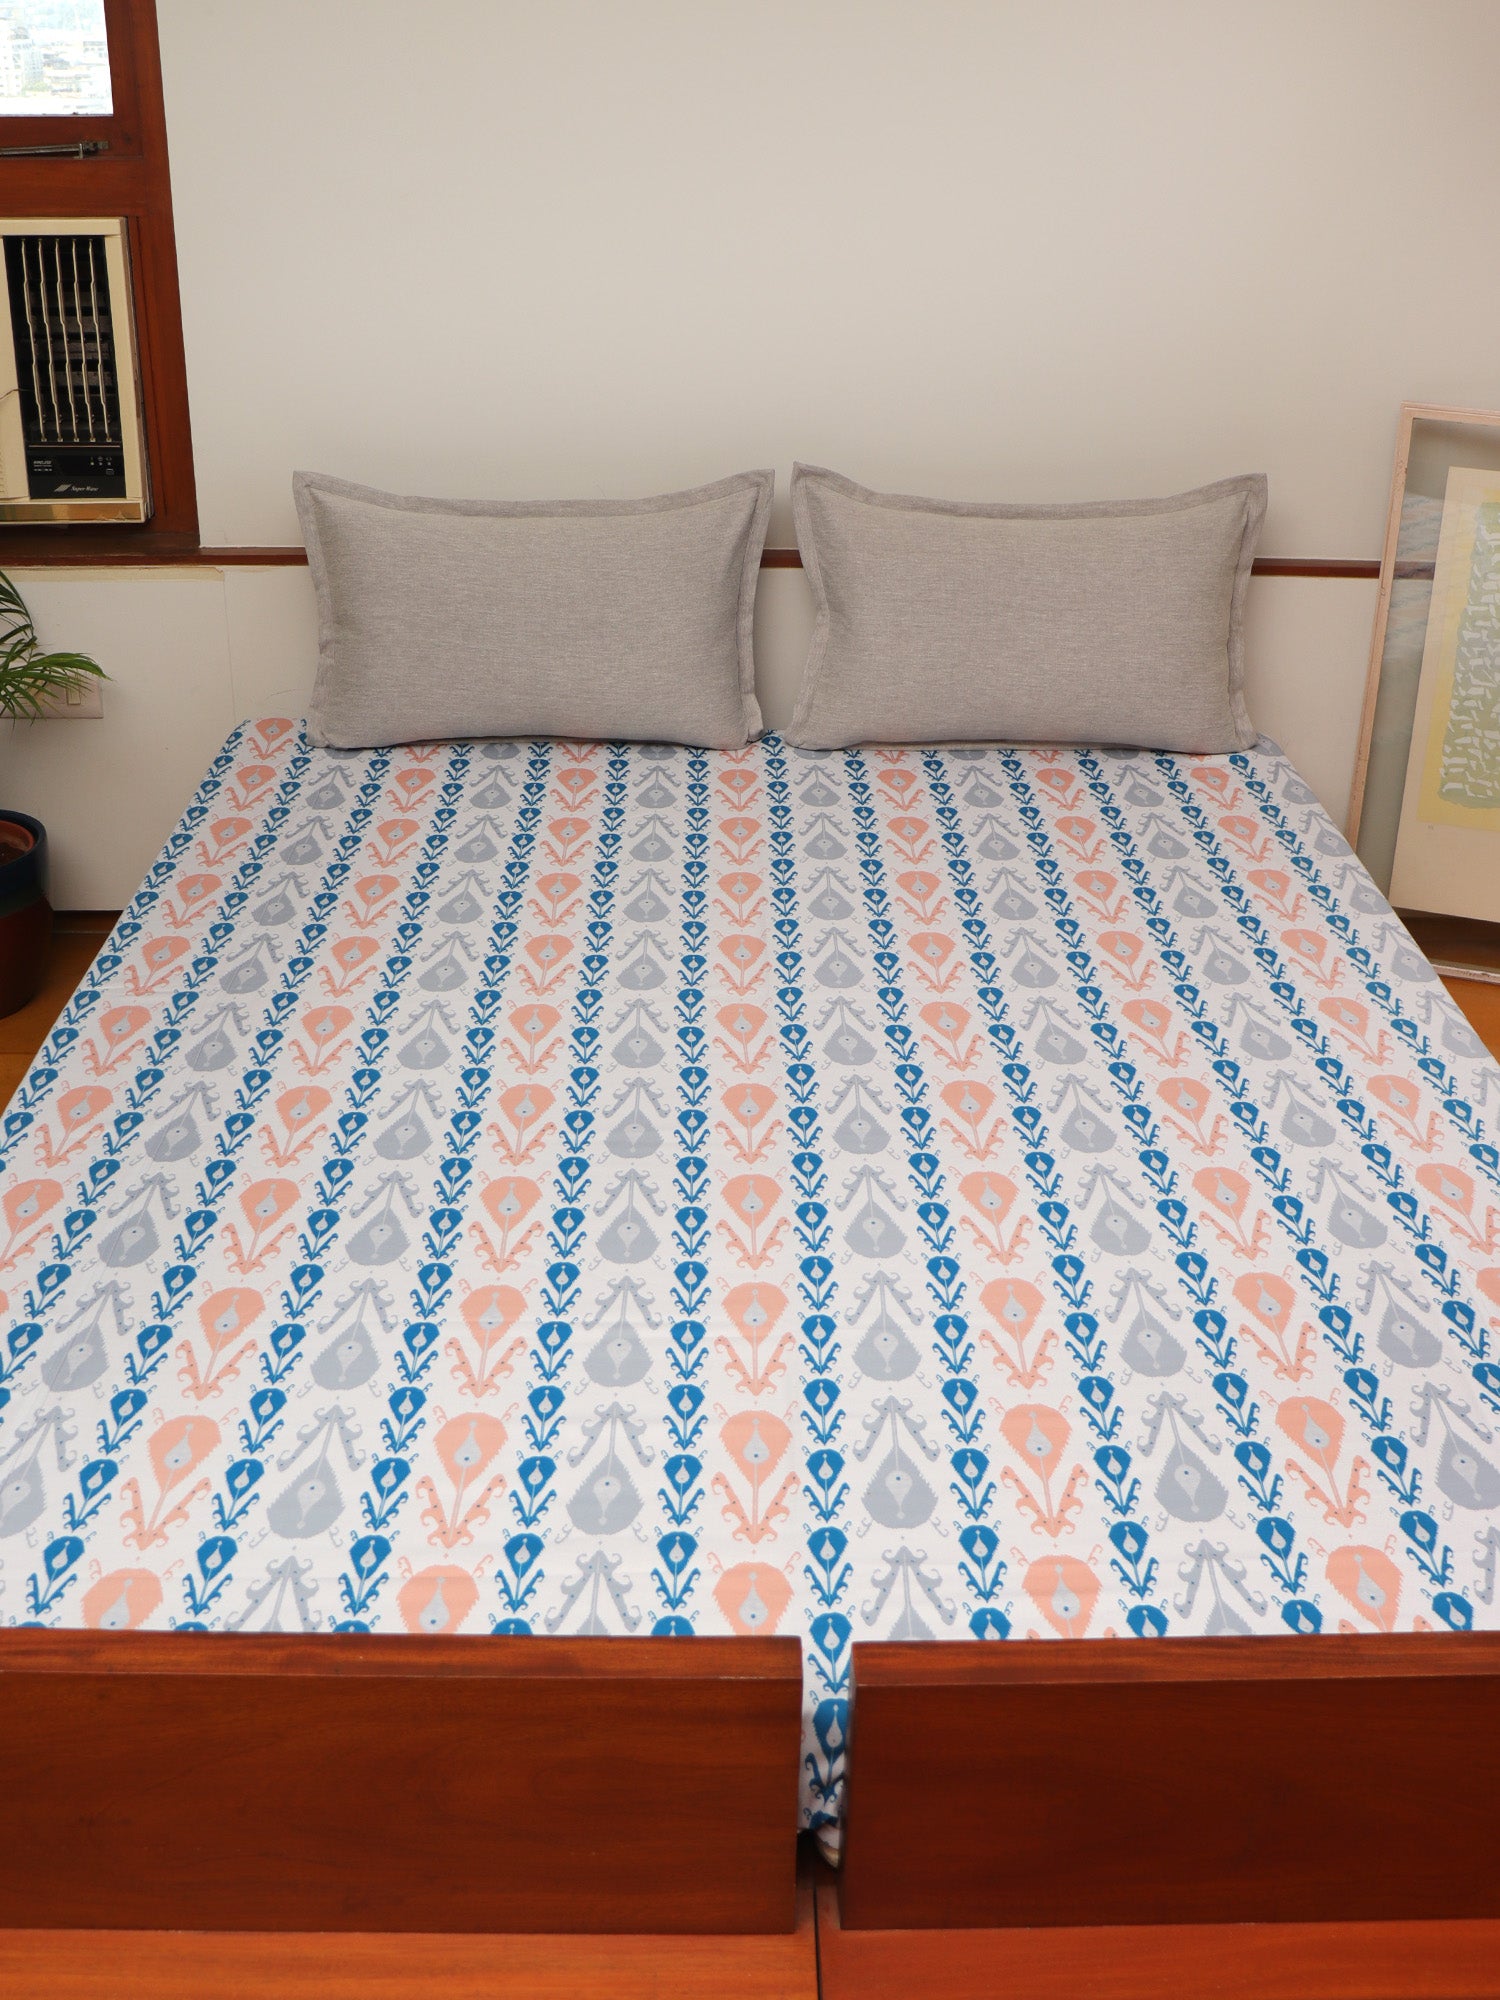 Printed Bedcover for Double Bed with 2 Pillow Covers | Queen Size - Blue Orange | Bedcover 90 x 108inches (7.5x9ft), Pillow Covers 17x27in